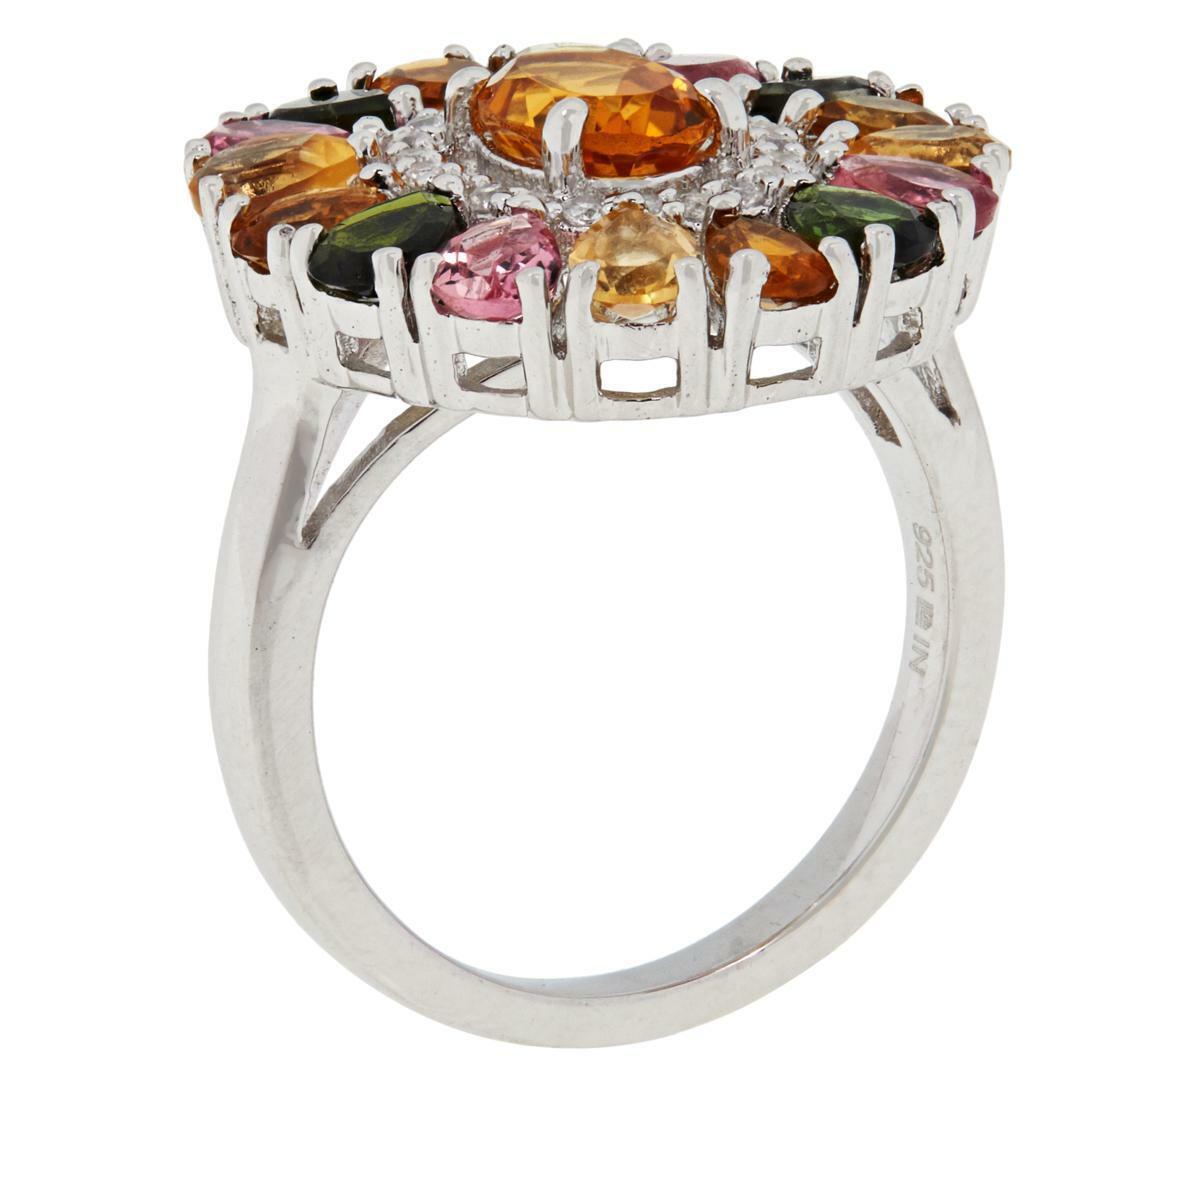 Colleen Lopez Sterling Silver Citrine and Multi Tourmaline Ring, Size 7